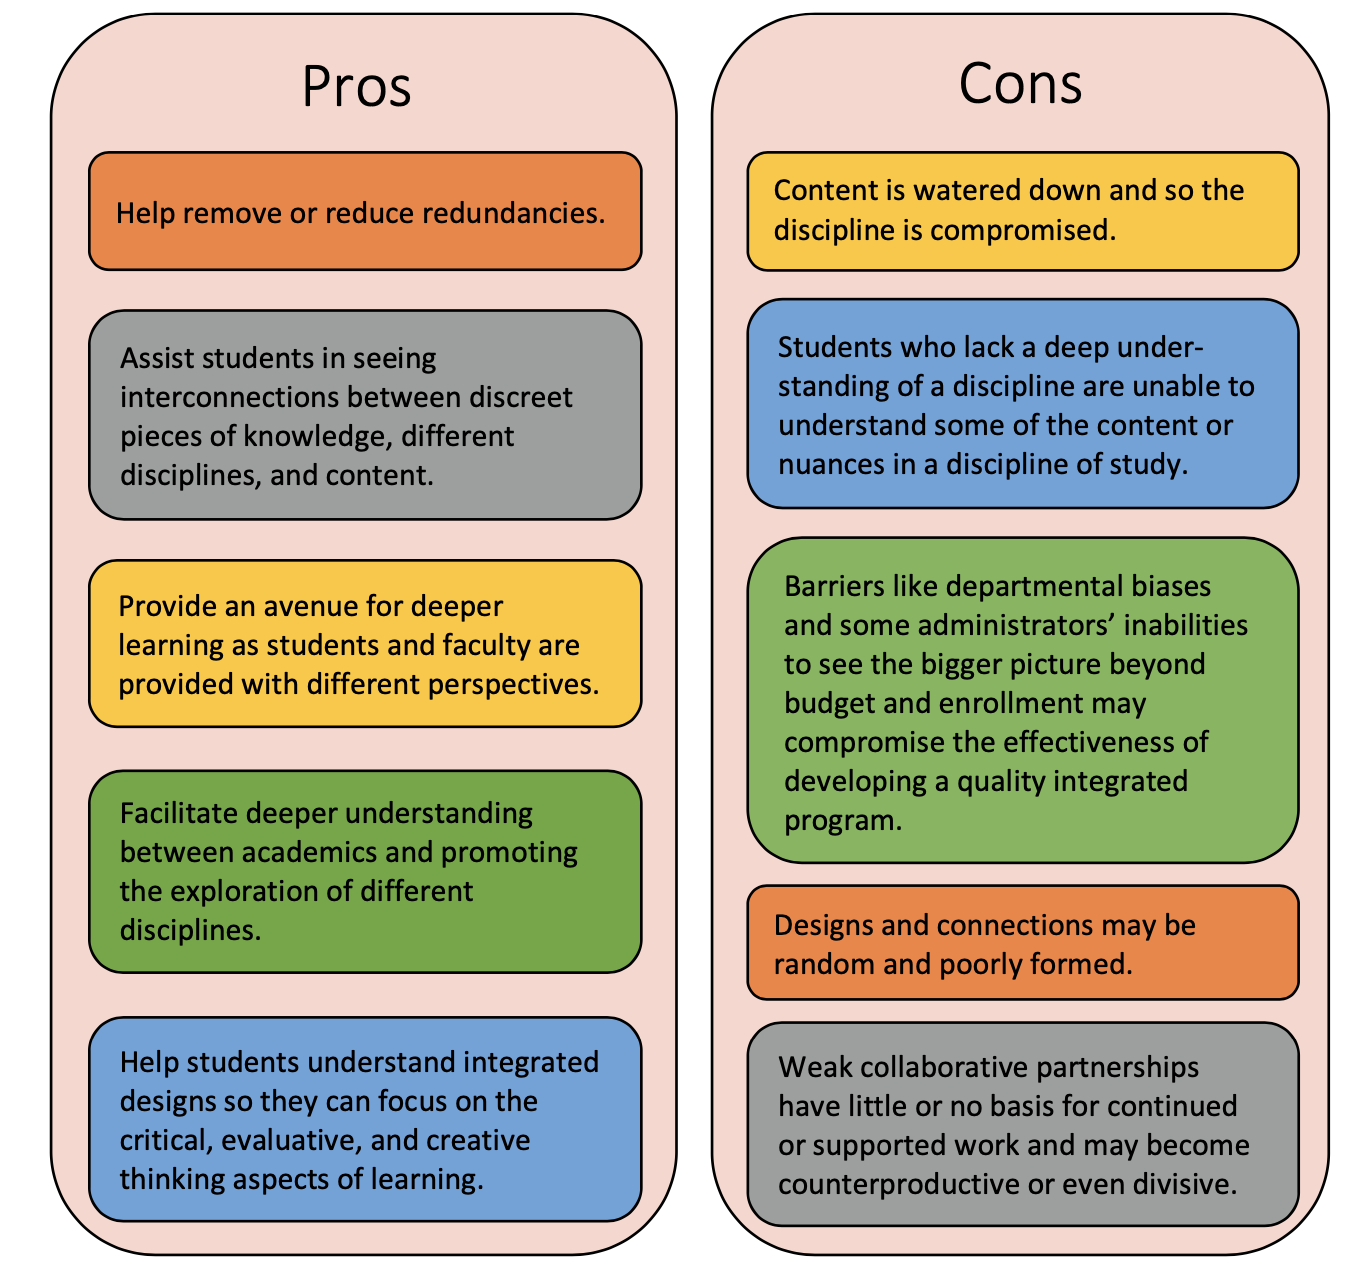 Flowchart with the pros and cons of curriculum integration